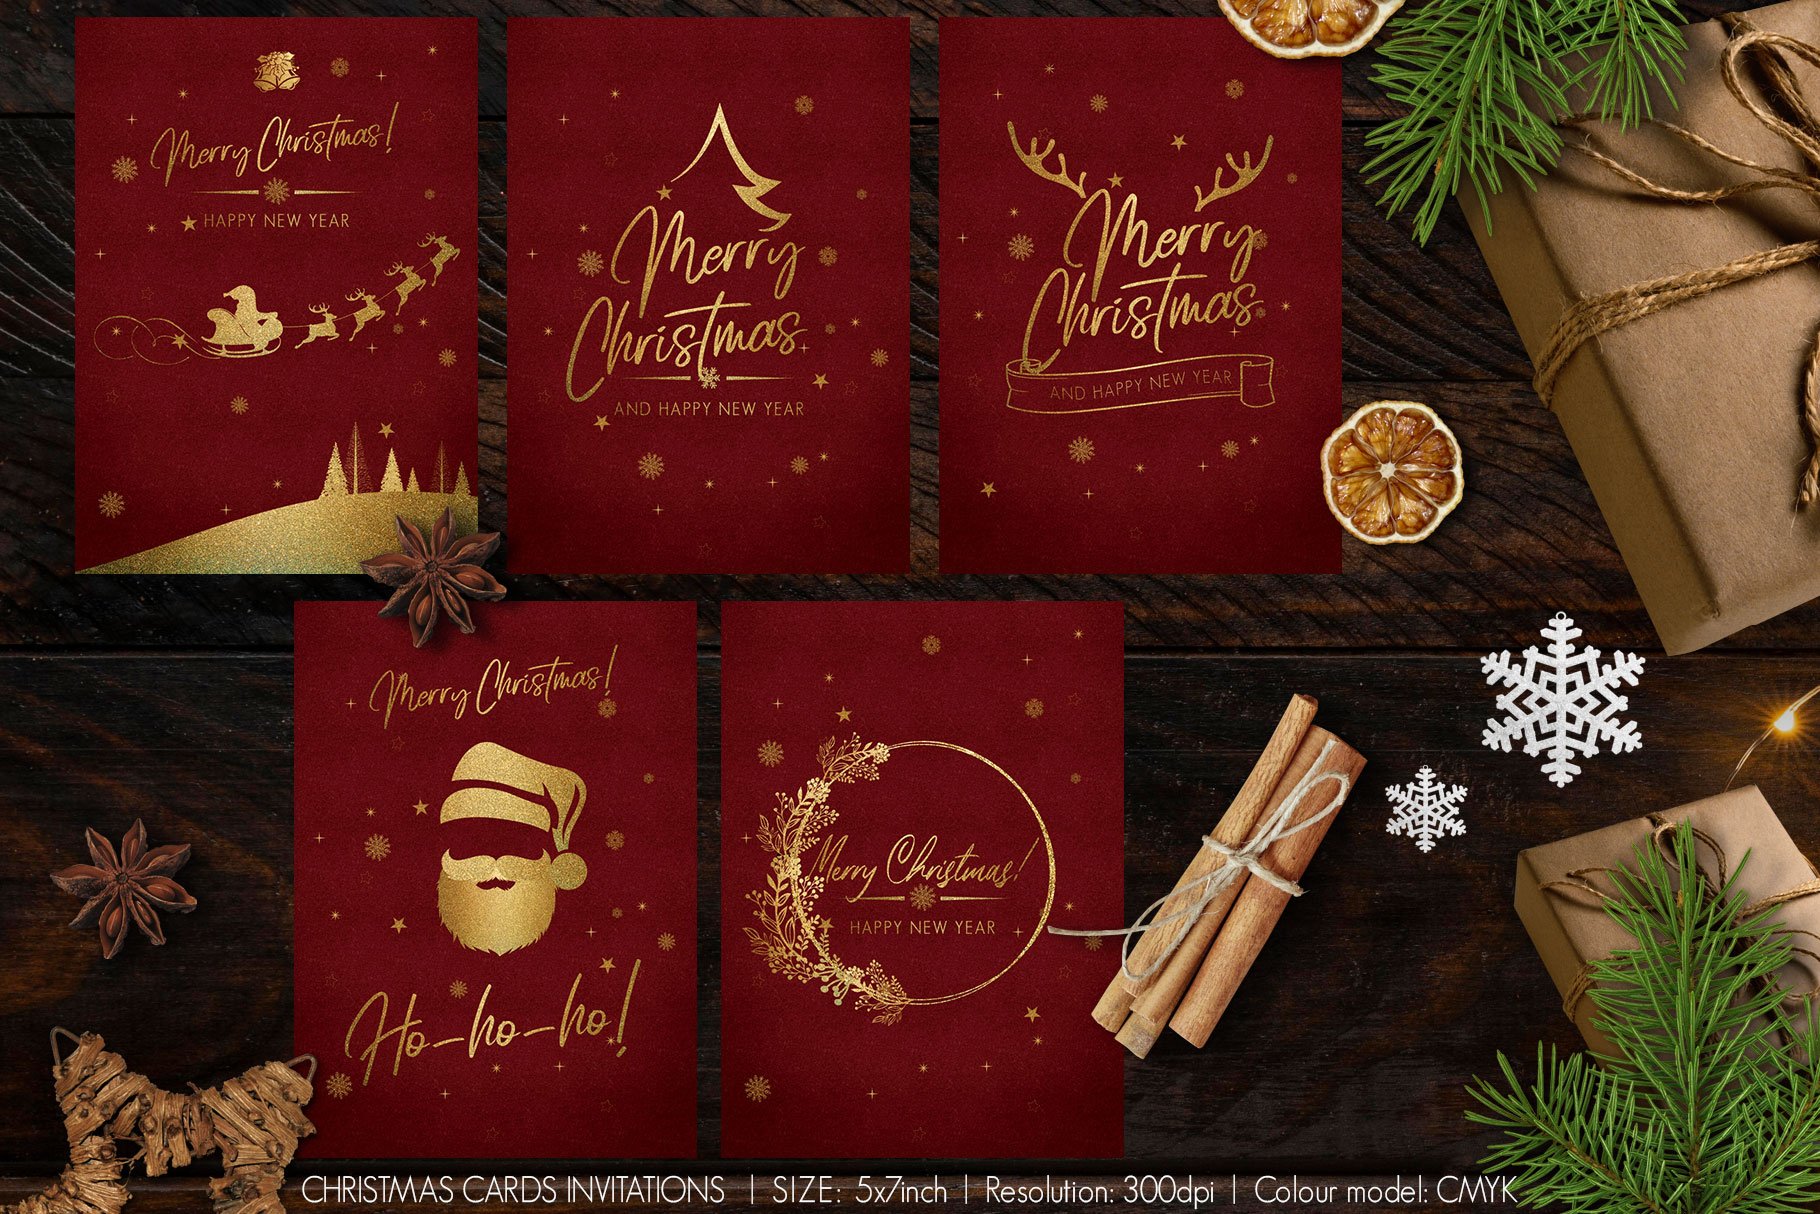 Christmas Cards Invitations cover image.